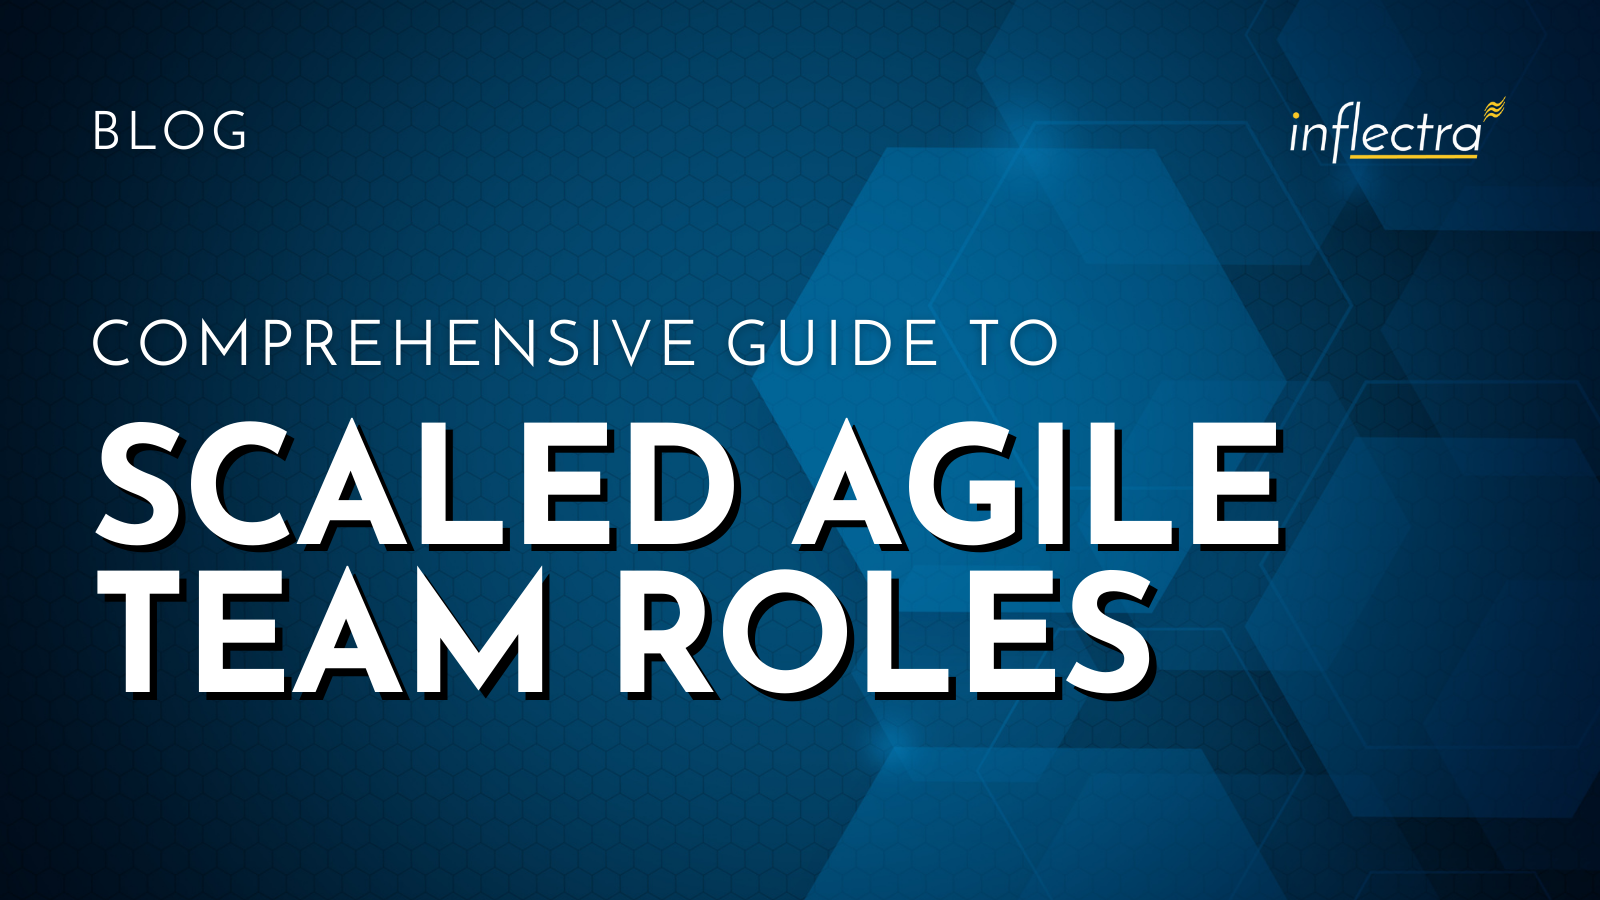 blog-comprehensive-guide-to-scaled-agile-team-roles-image